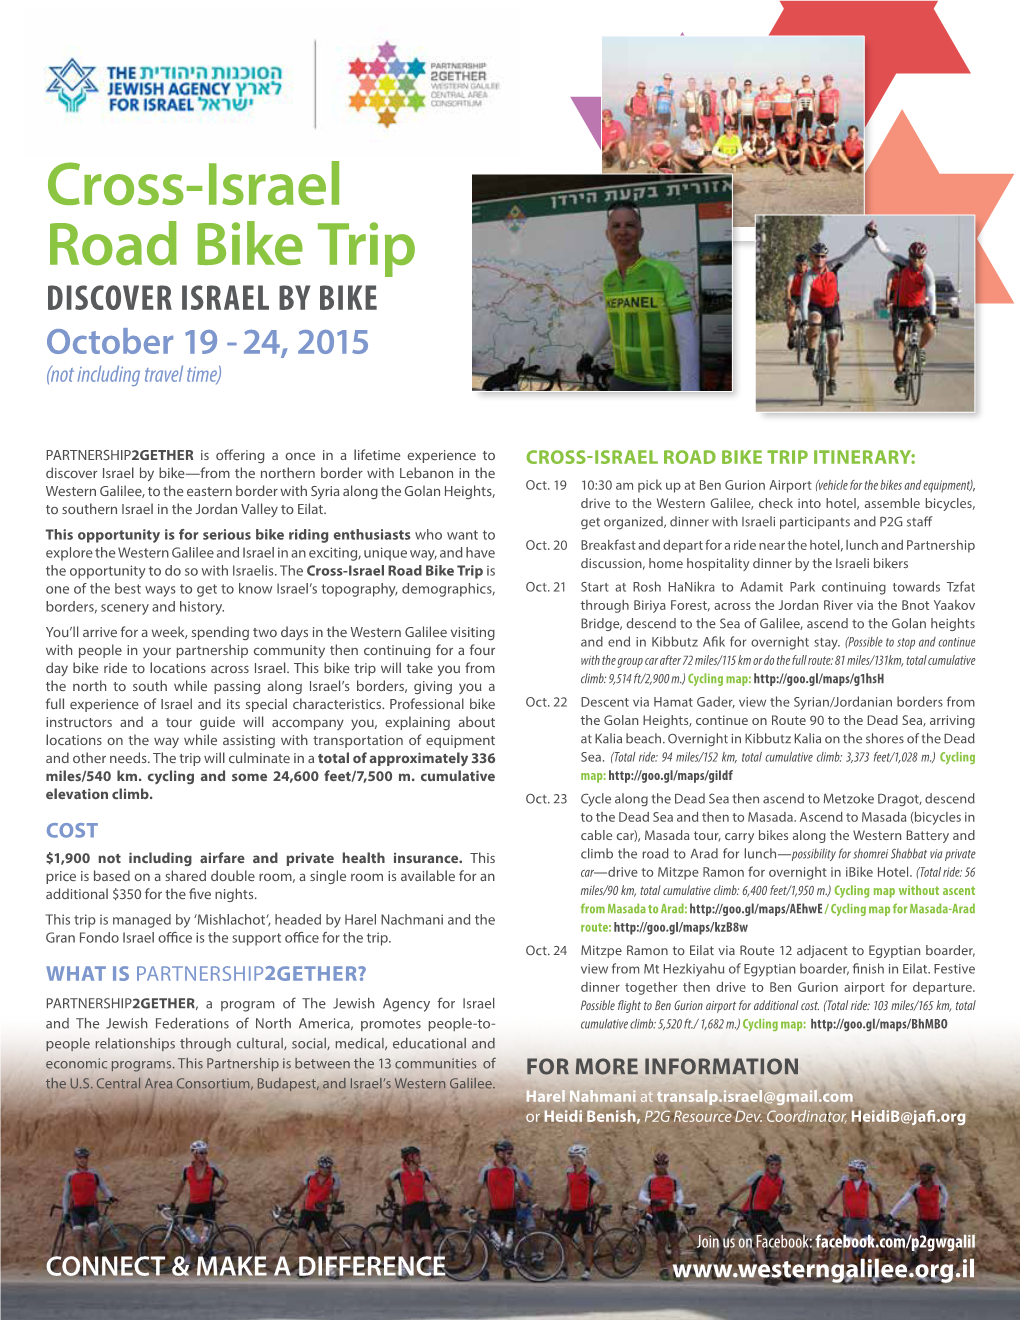 Cross-Israel Road Bike Trip DISCOVER ISRAEL by BIKE October 19 - 24, 2015 (Not Including Travel Time)